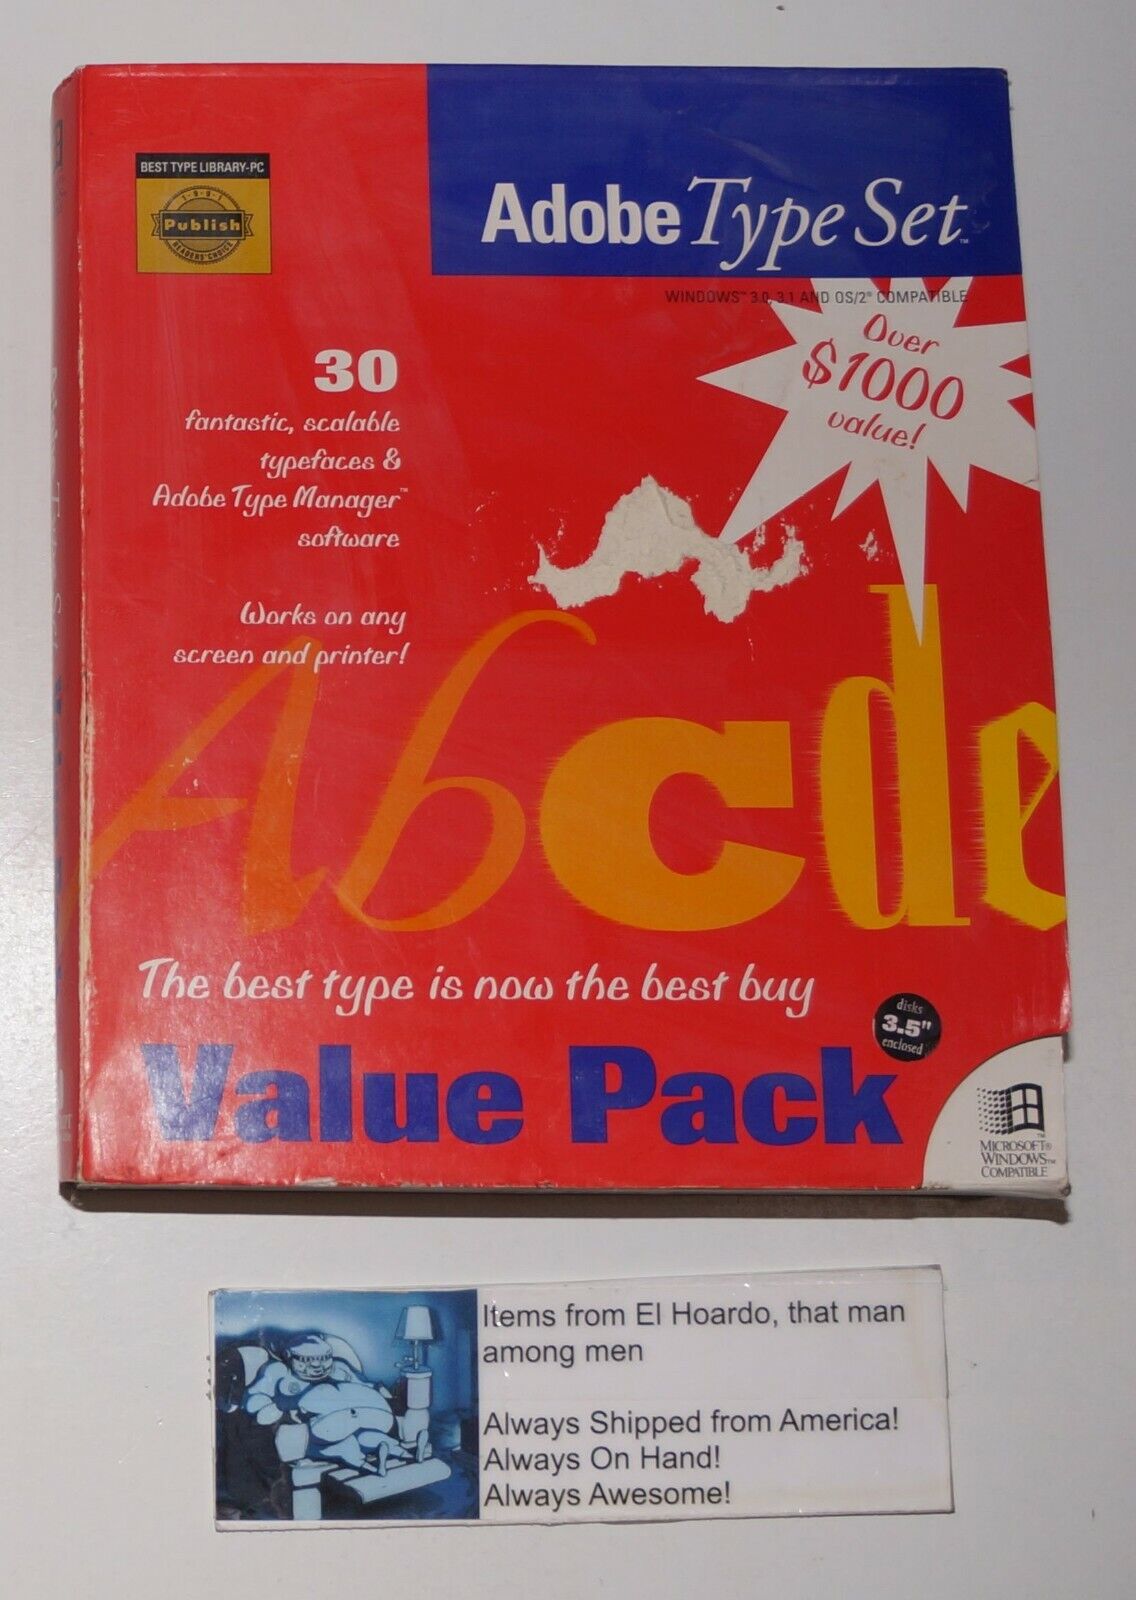 Adobe Type Set Value Pack for Windows 3.1 Complete in Box 